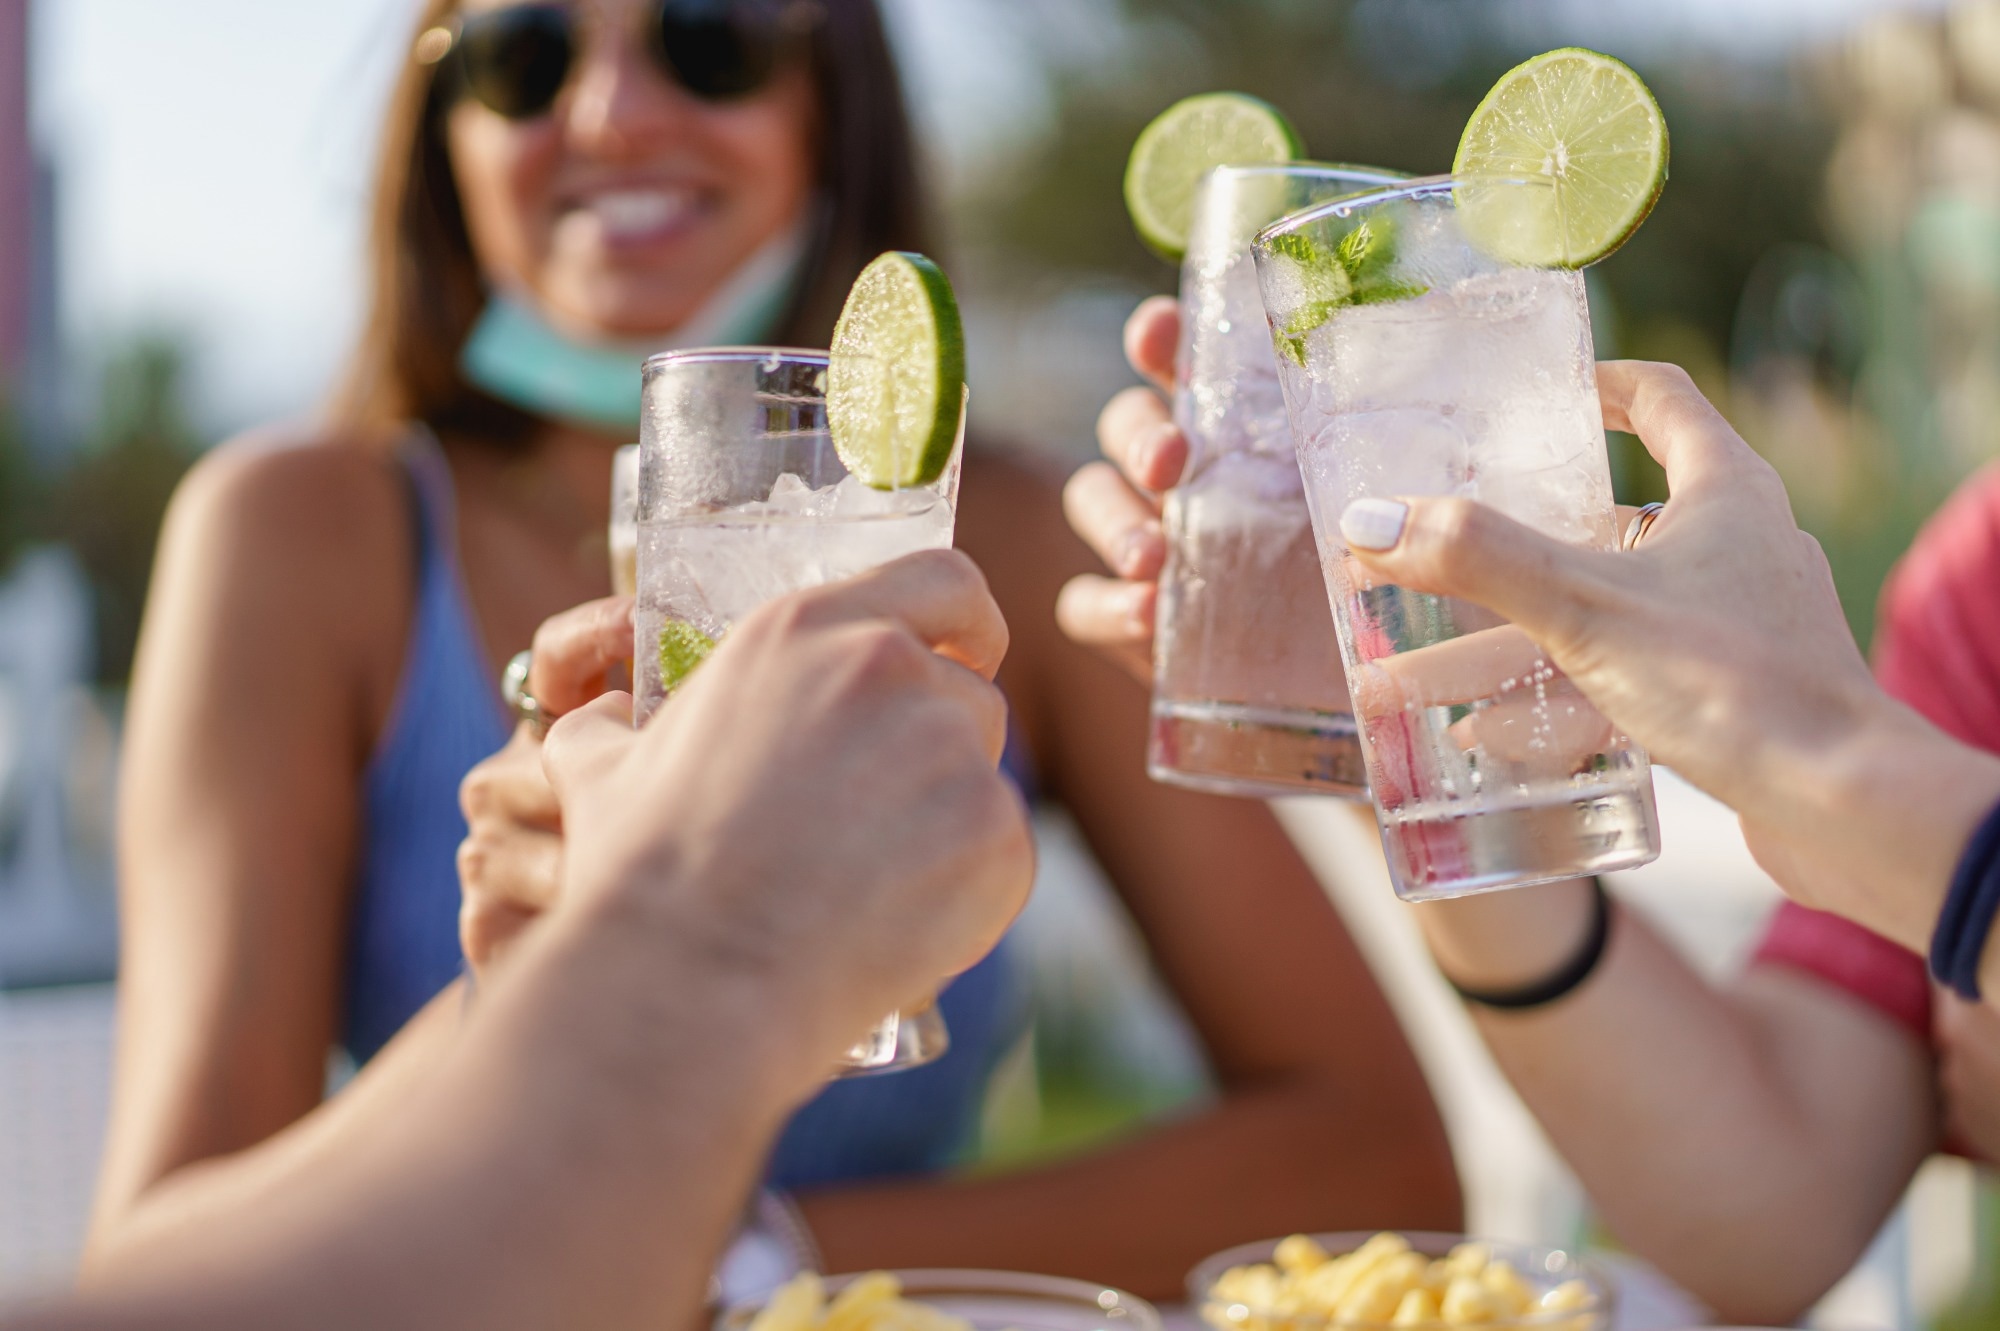 Study: Changes in alcohol consumption and alcohol problems before and after the COVID-19 pandemic: a prospective study in heavy drinking young adults. Image Credit: Lomb/Shutterstock.com